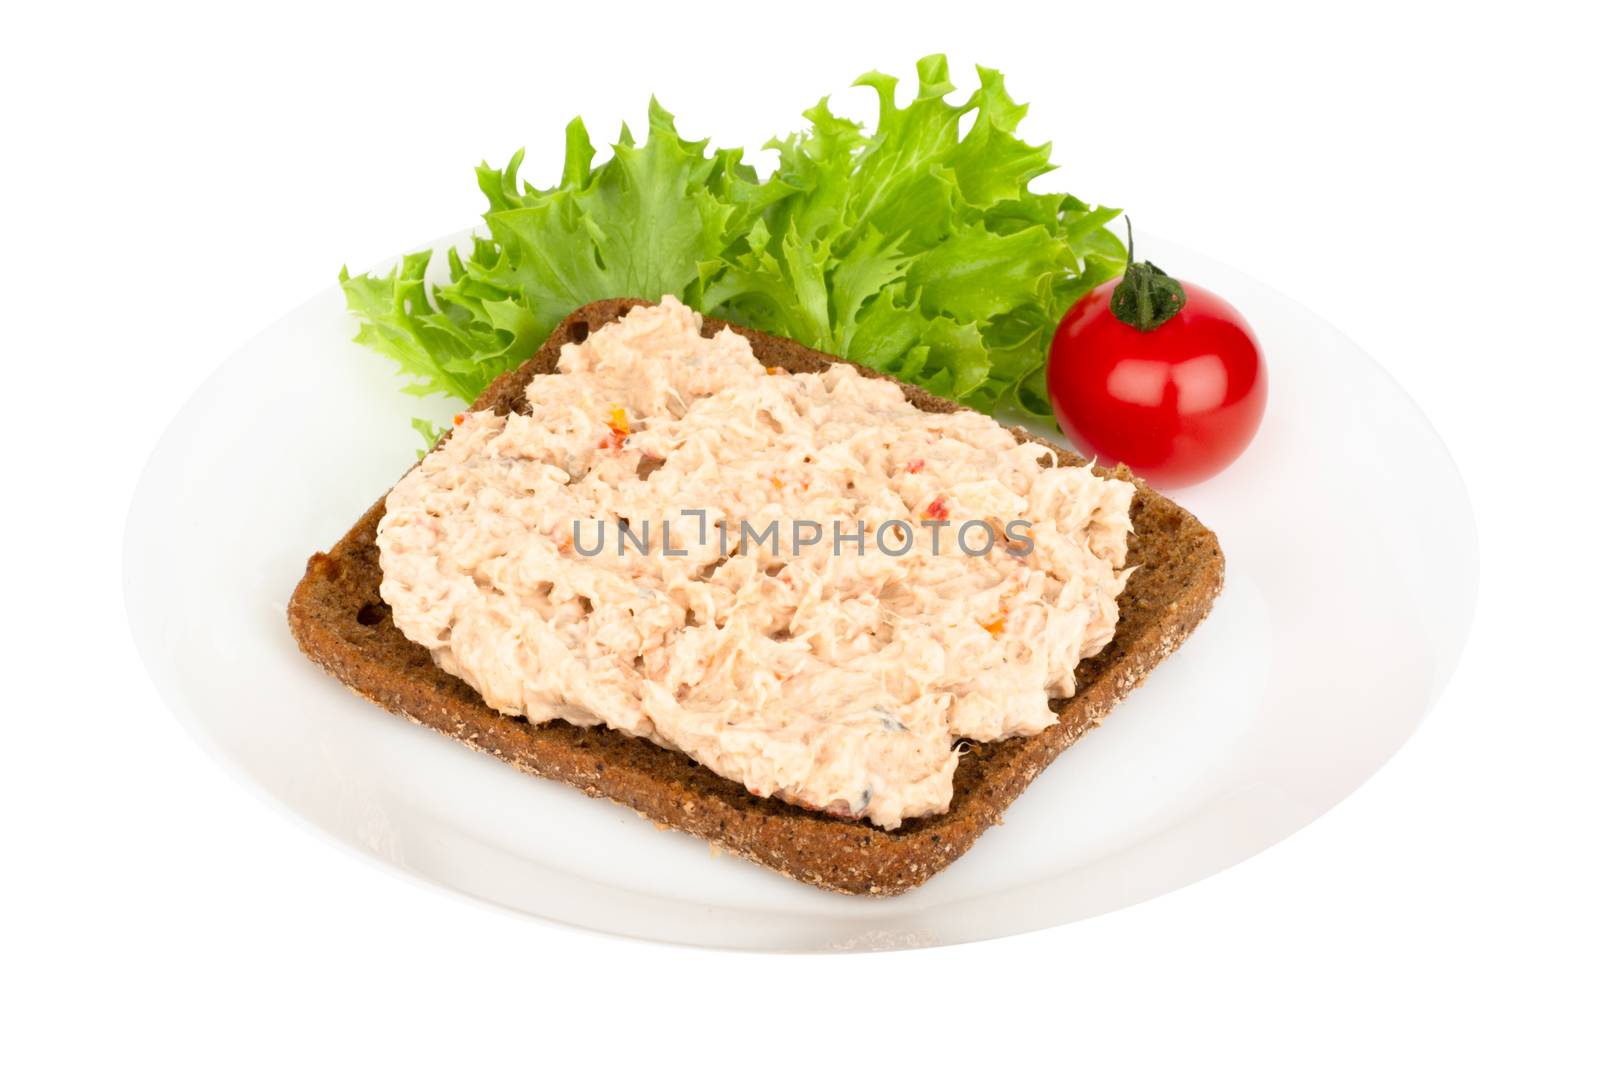 Smoked salmon and soft cheese spread fish pate sandwich on plate isolated on white background